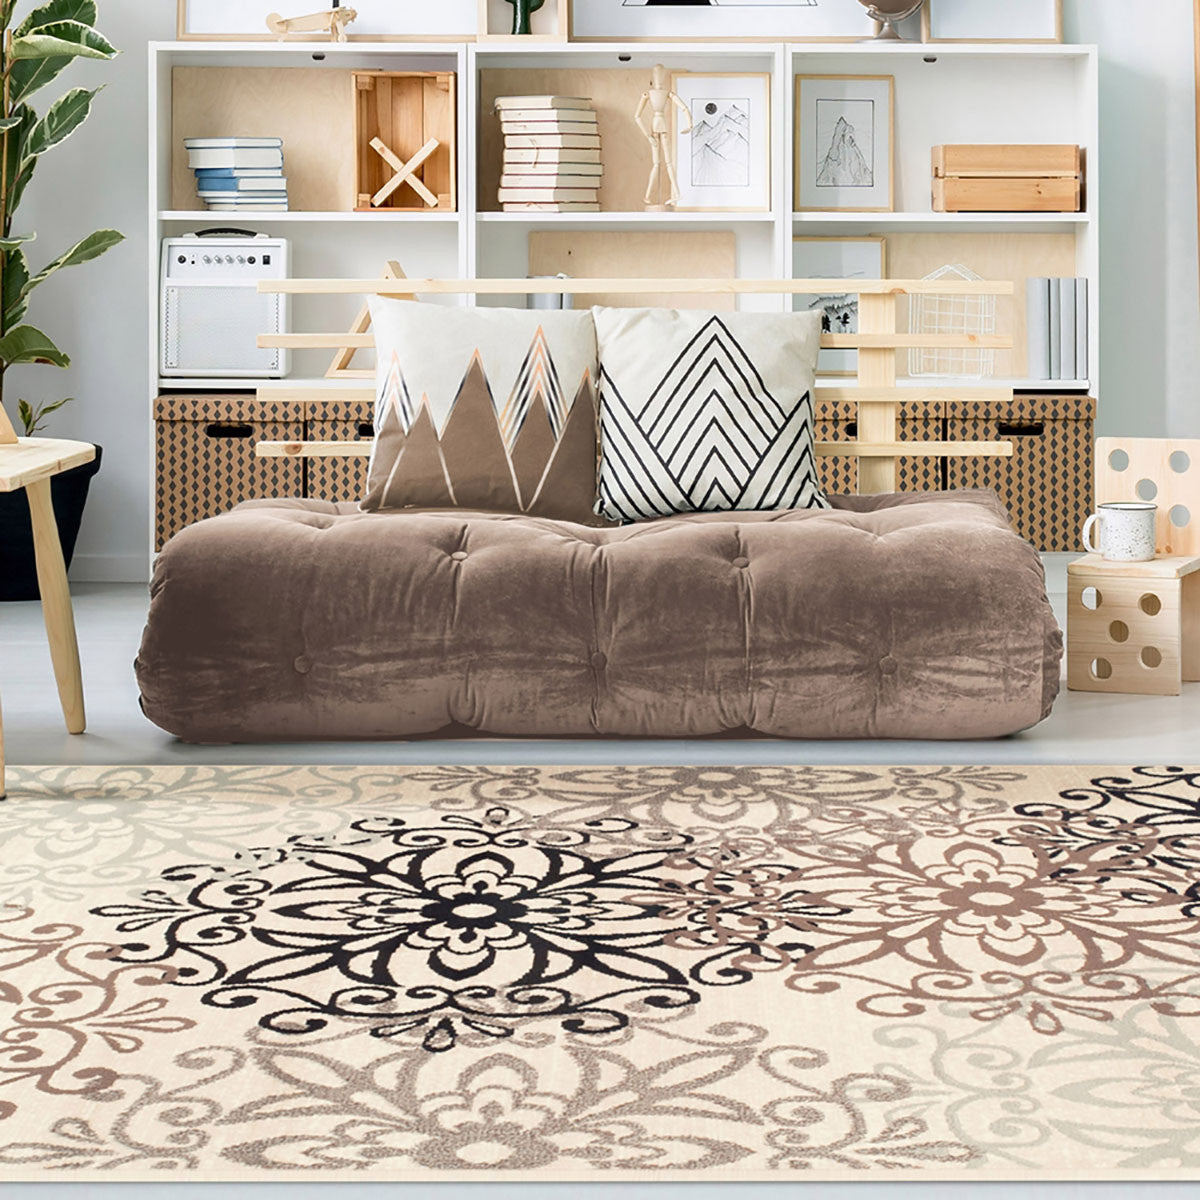 5' X 8' Tan Gray And Black Floral Medallion Stain Resistant Area Rug